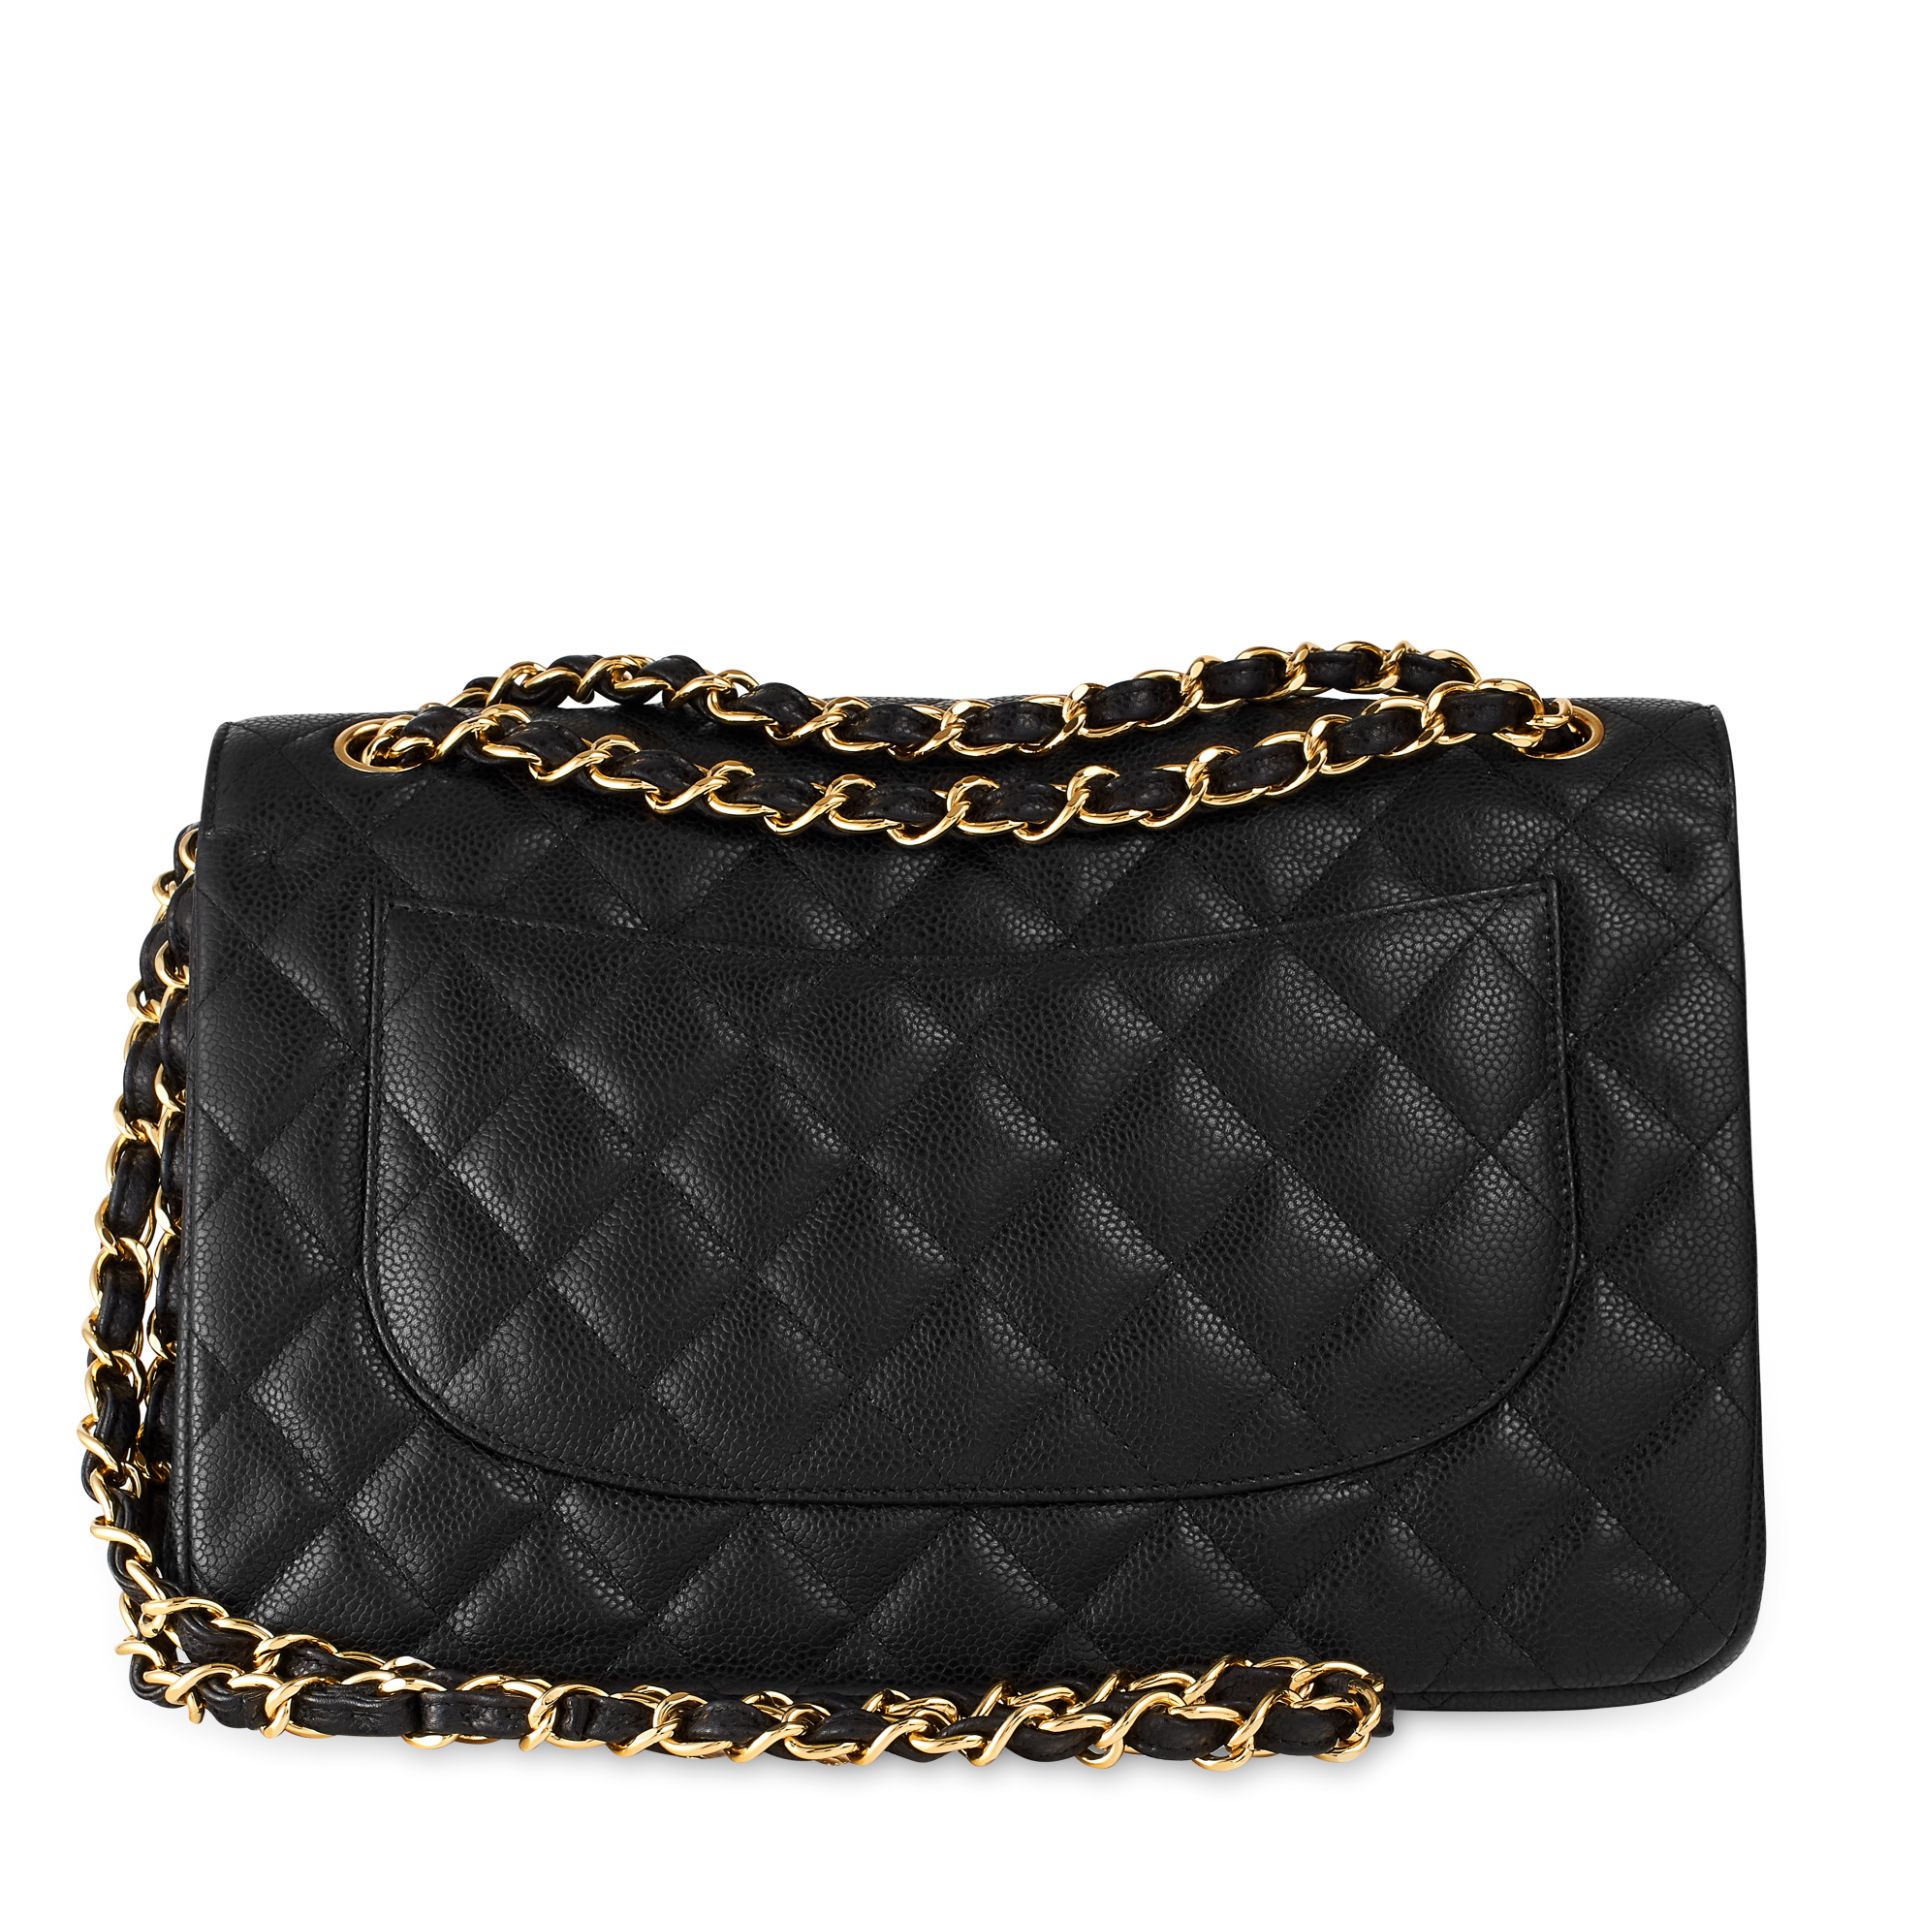 A BLACK CAVIAR CLASSIC 2.55 DOUBLE FLAP HAND BAG, CHANEL quilted leather with gold tone hardware, - Image 2 of 4